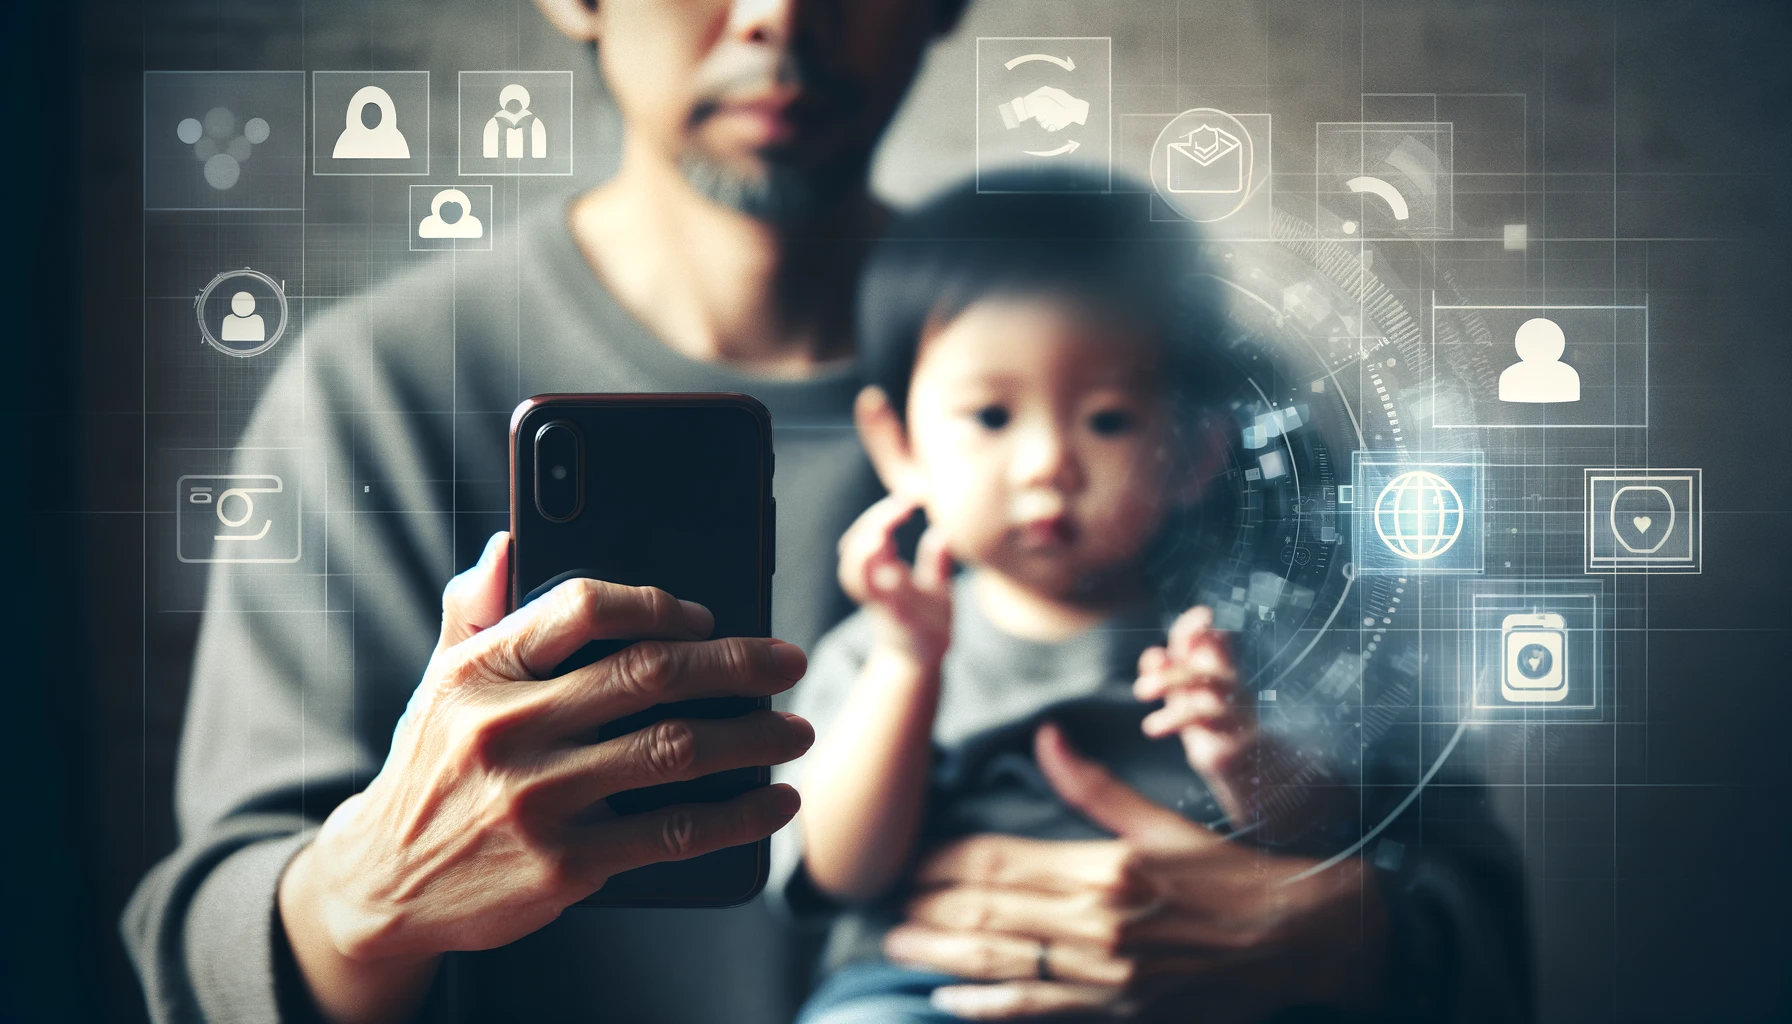 A parent holding a smartphone, capturing a moment with their child. The child is partially obscured or blurred to symbolize privacy concerns of sharenting - Kidday